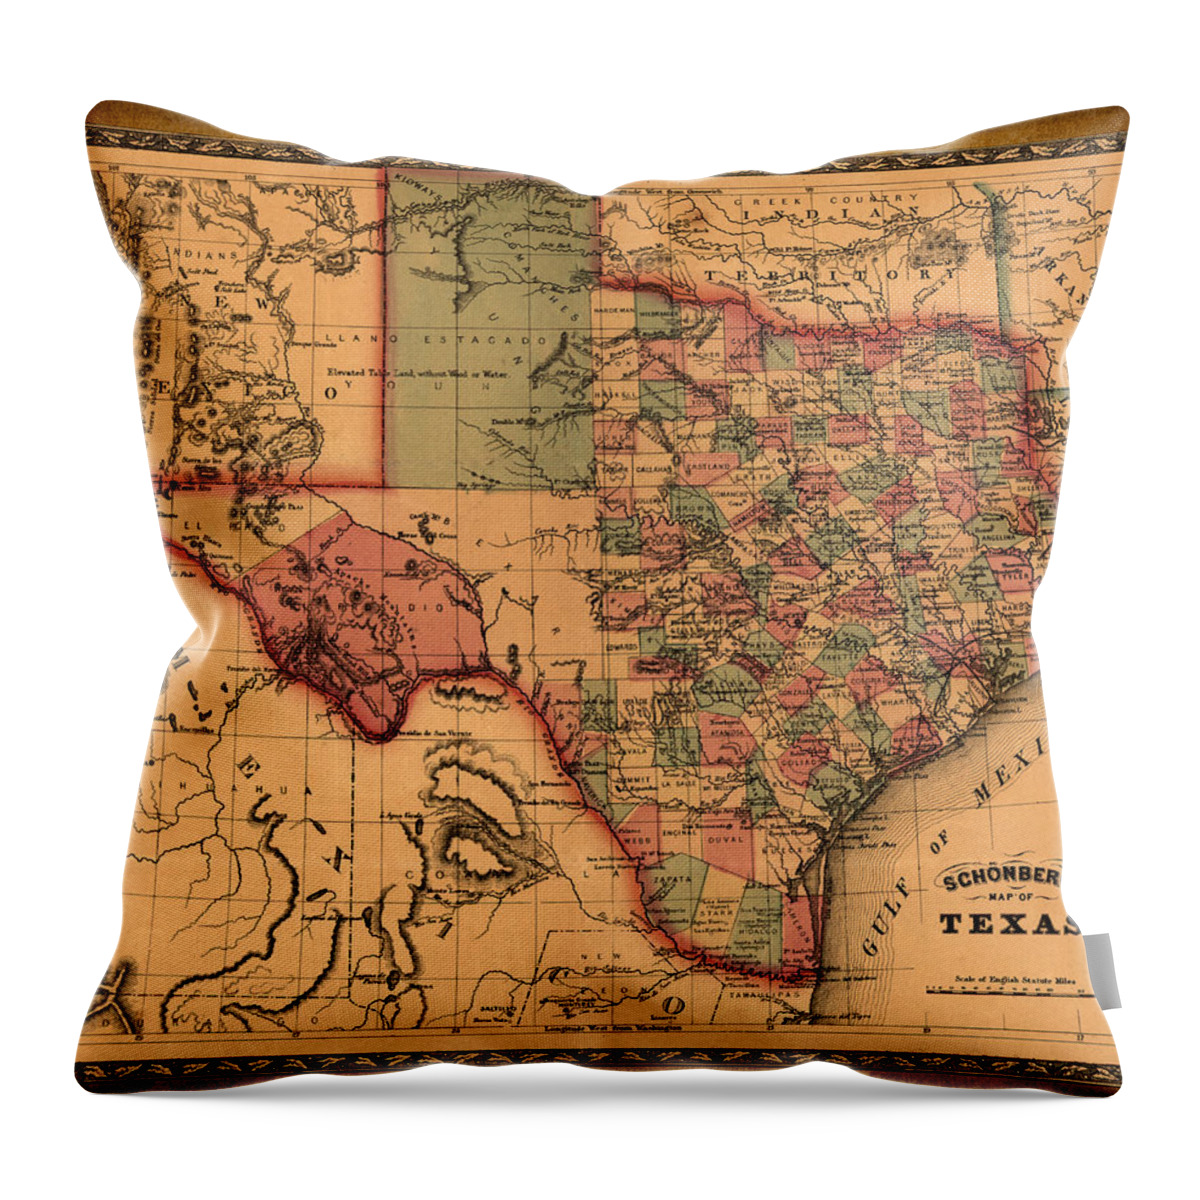 Texas Throw Pillow featuring the drawing Texas Map Art - Vintage Antique map of Texas by World Art Prints And Designs